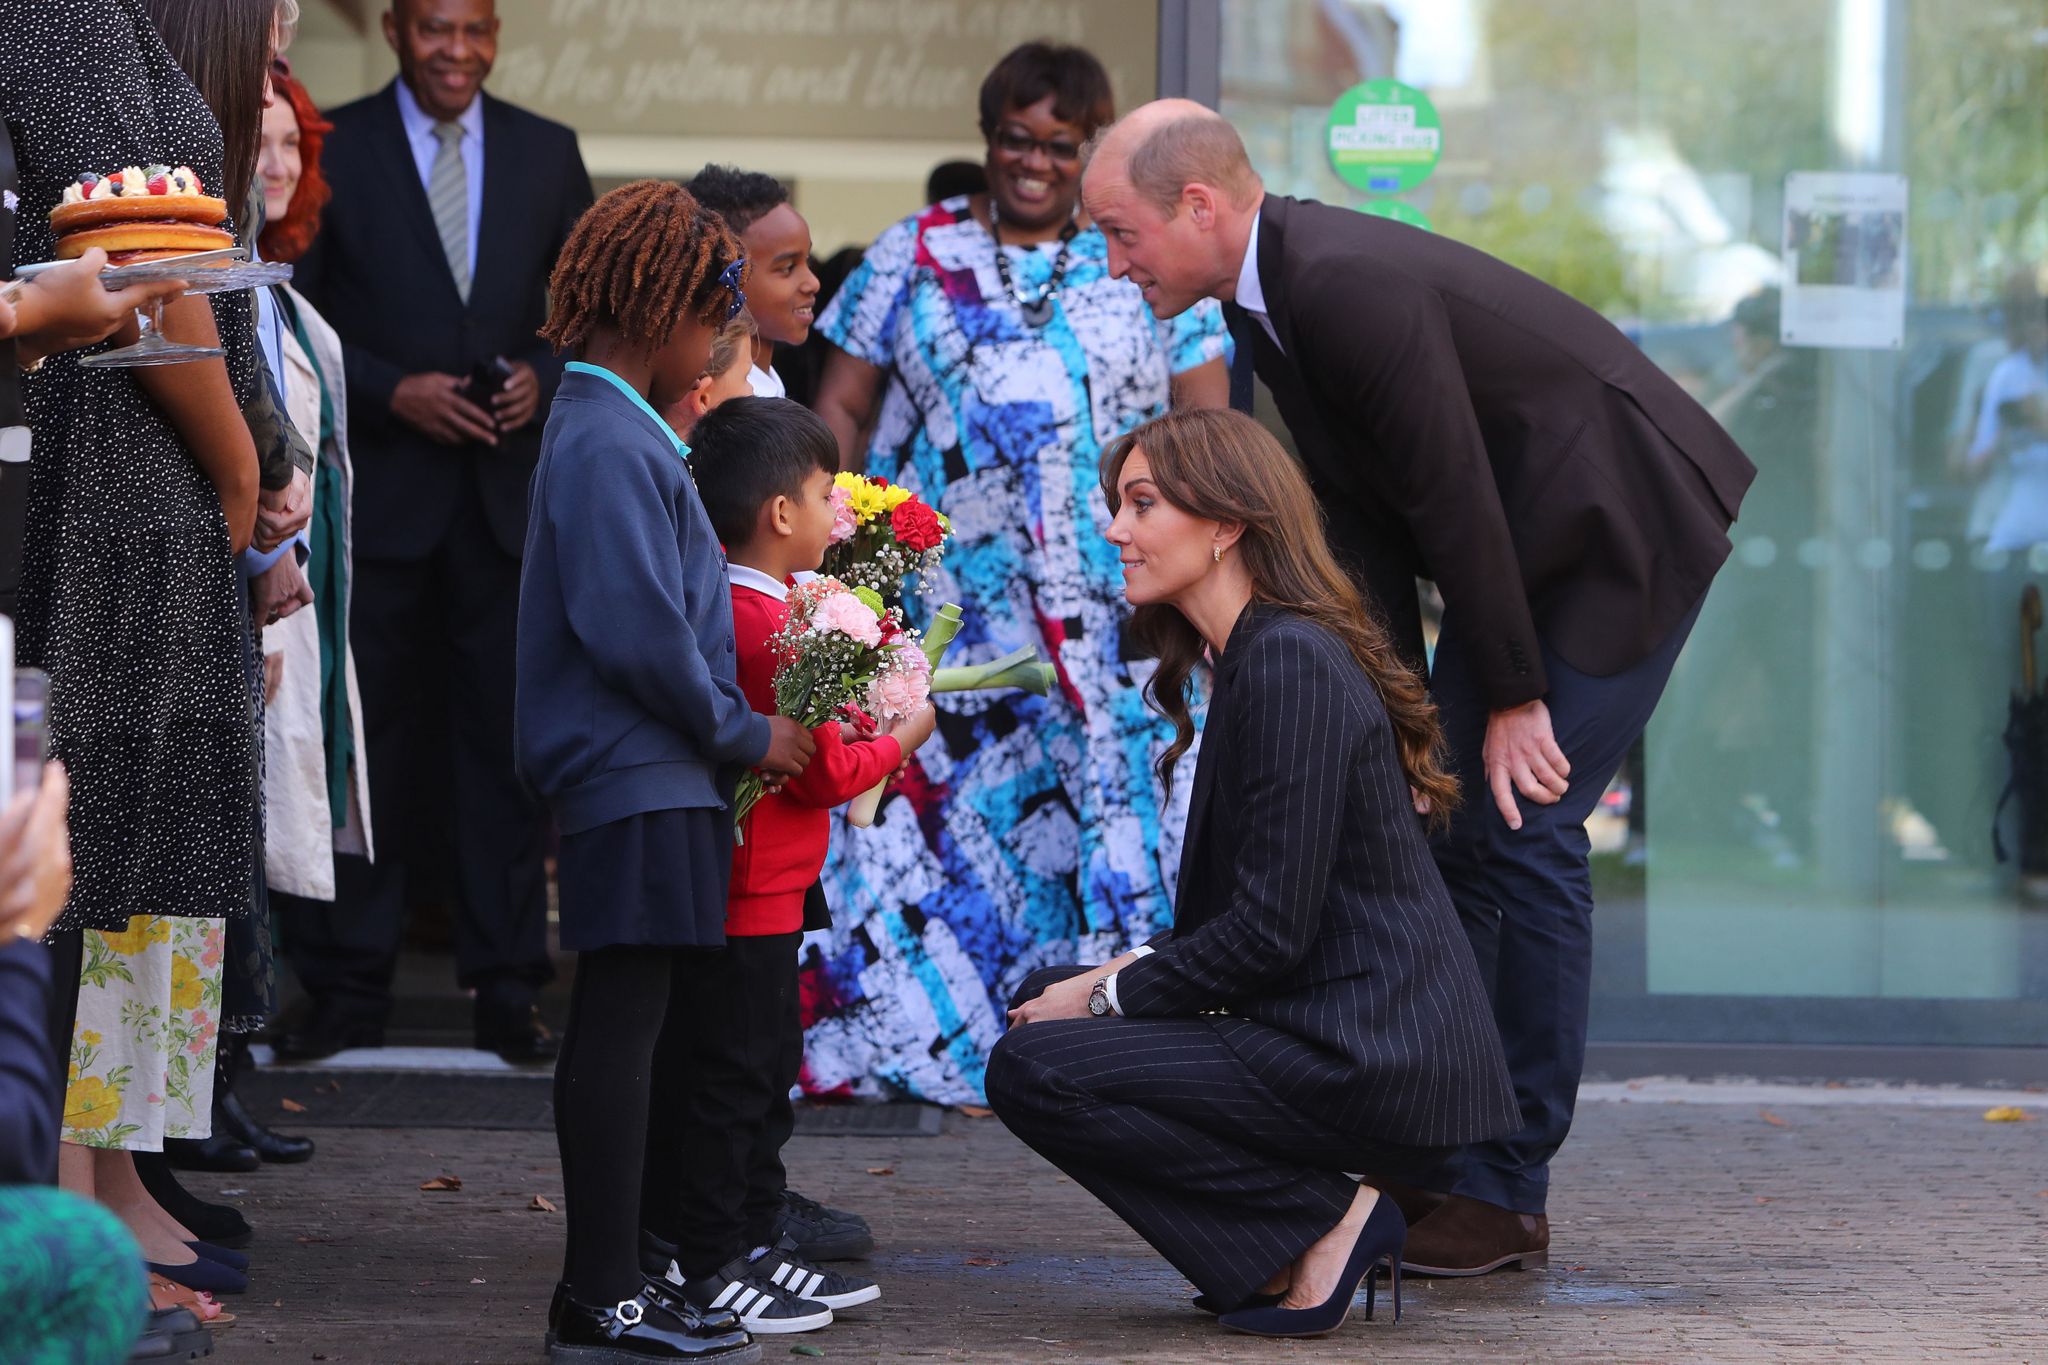 The Prince and Princess of Wales receive flowers from Akachi, 6, Humzah, 6, Ayla-May, 7, and Mazin, 8 after a visit to the Grange Pavilion in Cardiff to meet with members from the Windrush Cymru Elders, Black History Cymru 365, and the Ethnic Minority Youth Forum for Wales, and hear about the contribution the Windrush generation has had on the Welsh community and learn about how young minority ethnic individuals are creating positive change in Wales.